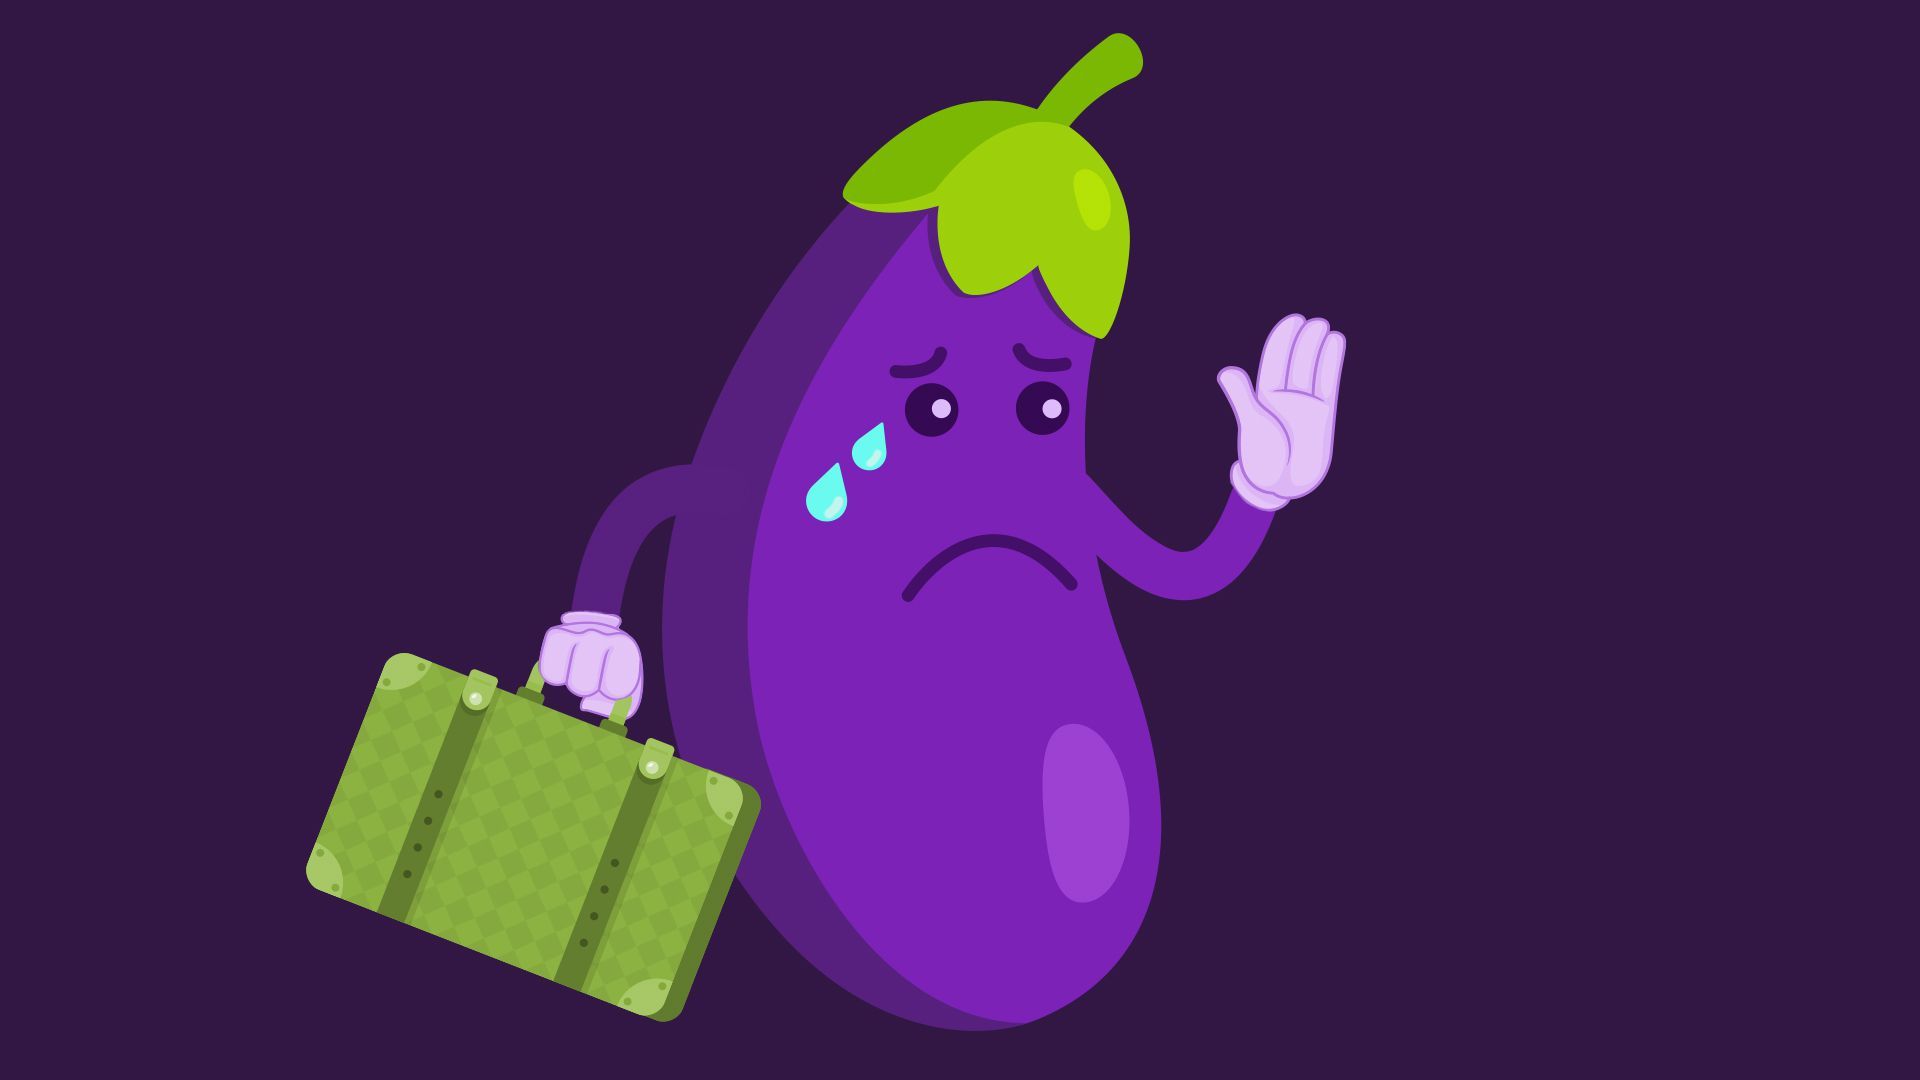 Illustration of a sad eggplant holding a suitcase and tearfully waving goodbye.